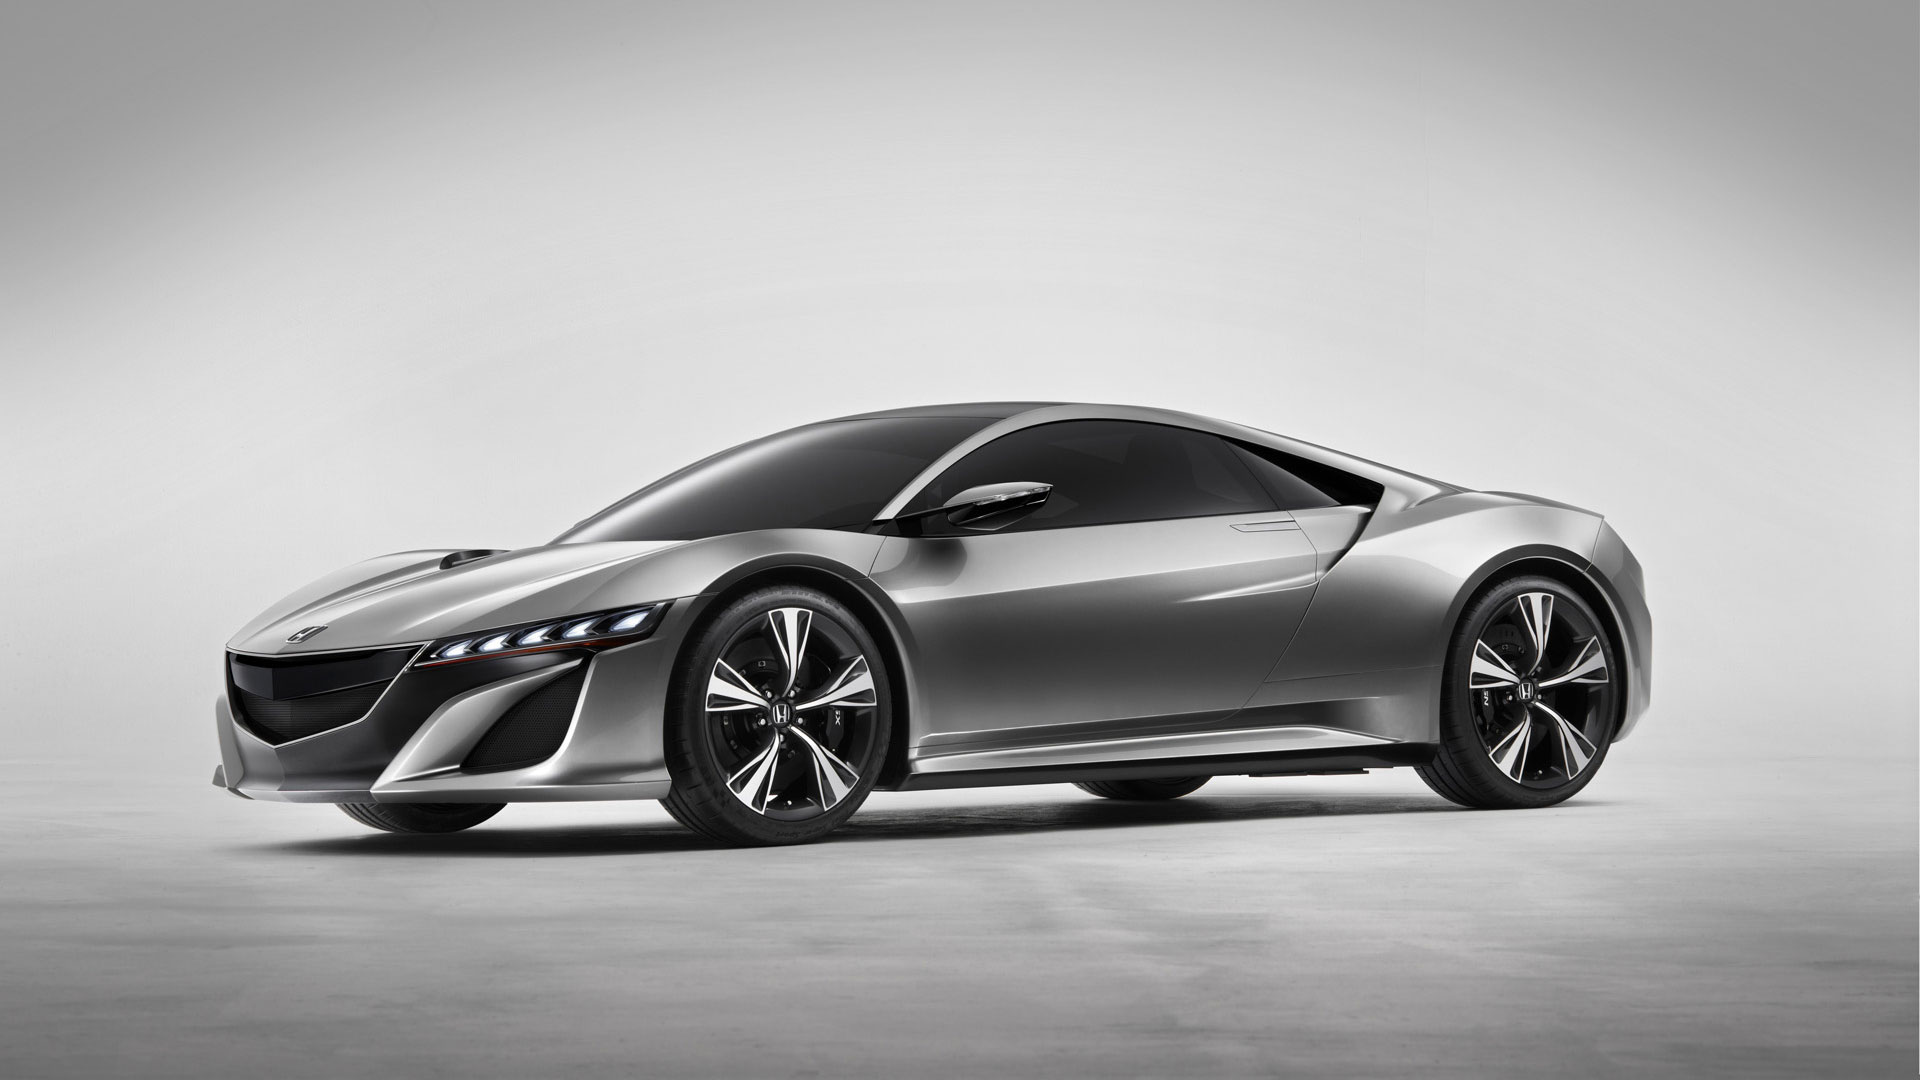 Free Download Get Honda Nsx Wallpaper Wallpaper For Desktop Iphone Android Mobile 19x1080 For Your Desktop Mobile Tablet Explore 45 Honda Nsx Wallpaper Nsx Wallpaper High Resolution Acura Nsx Wallpaper Hd